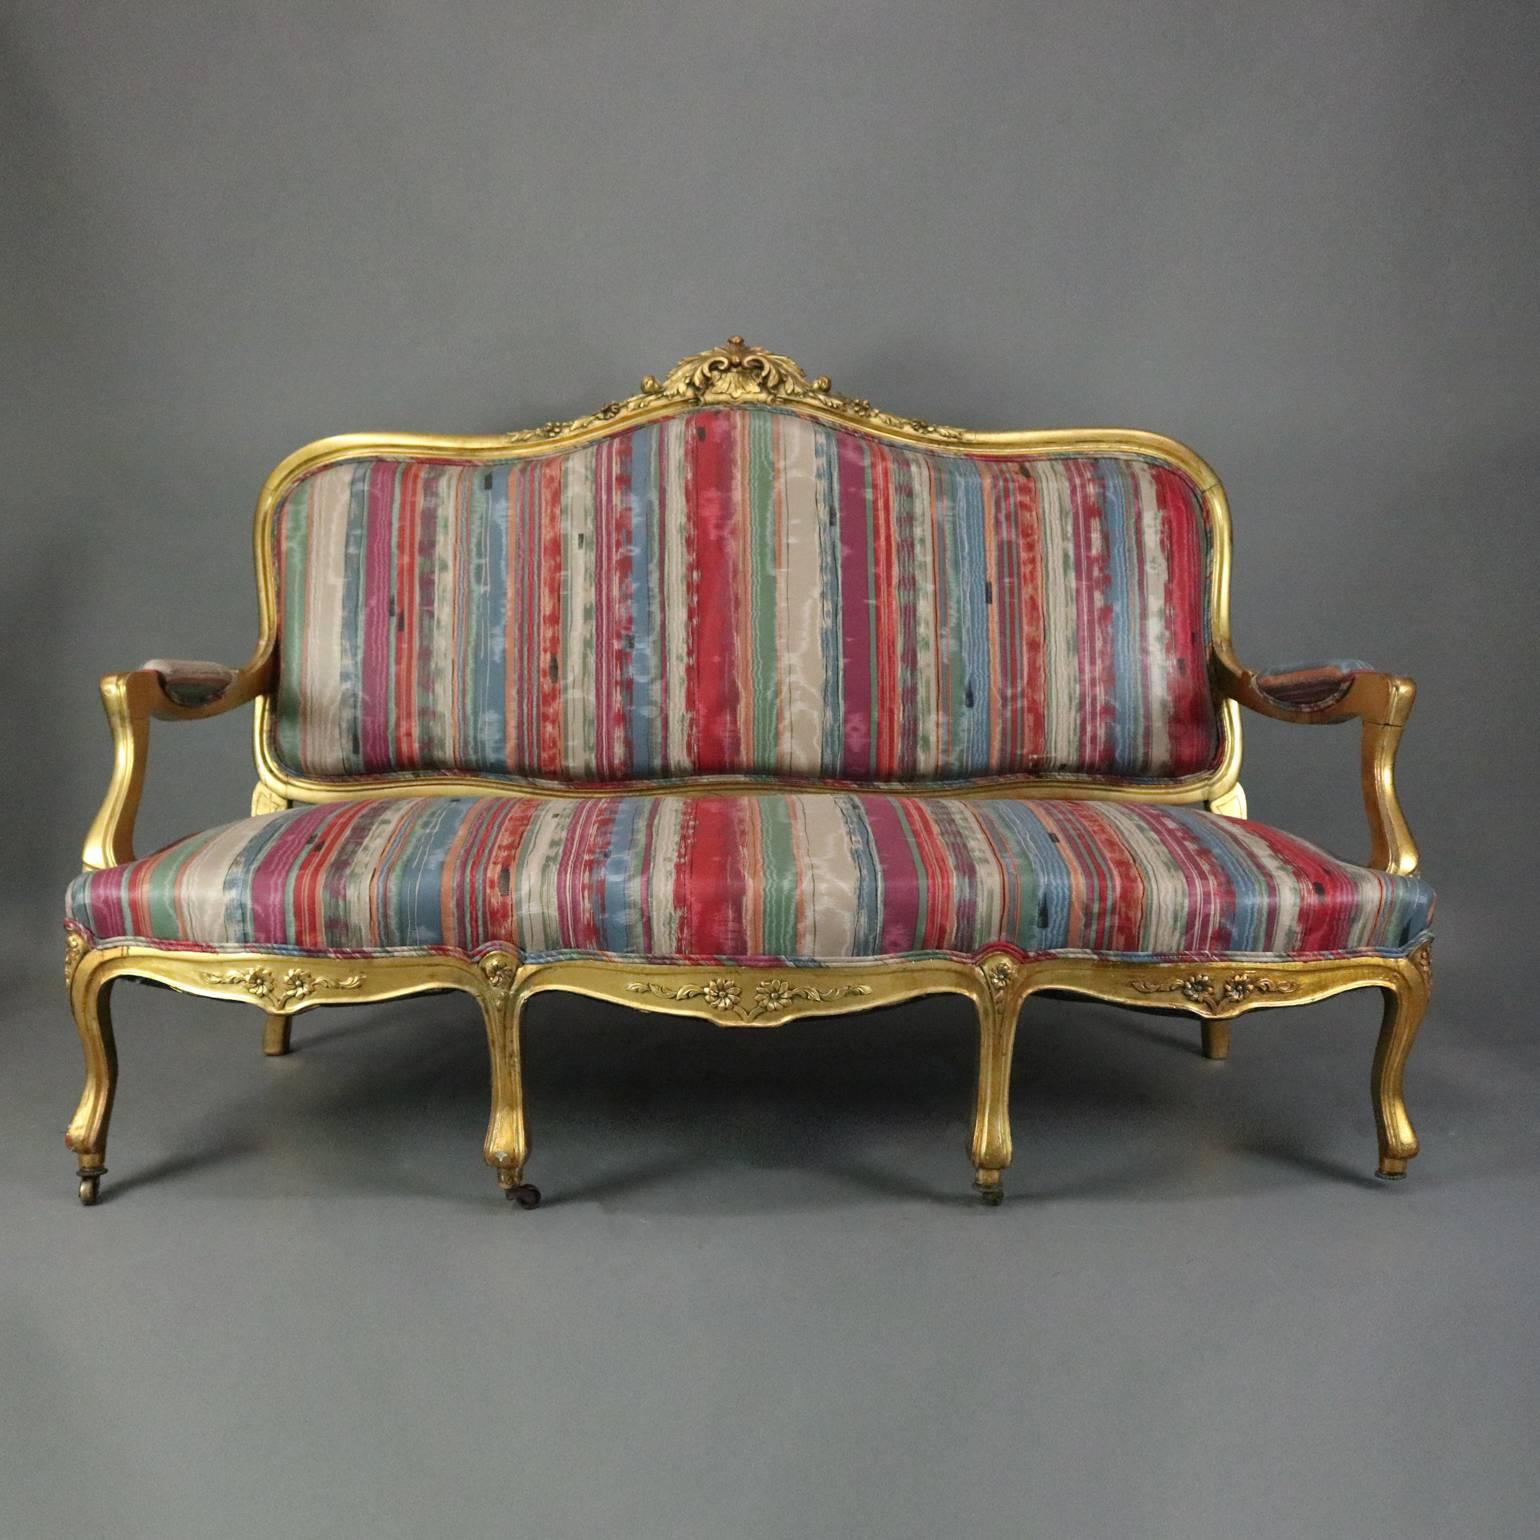 Antique French Louis XIV style upholstered settee feature carved giltwood construction with acanthus and foliate decoration, circa 1870

Matching pair of armchairs and side chairs listed separately

Measures - 43" H x 63" W x 25"